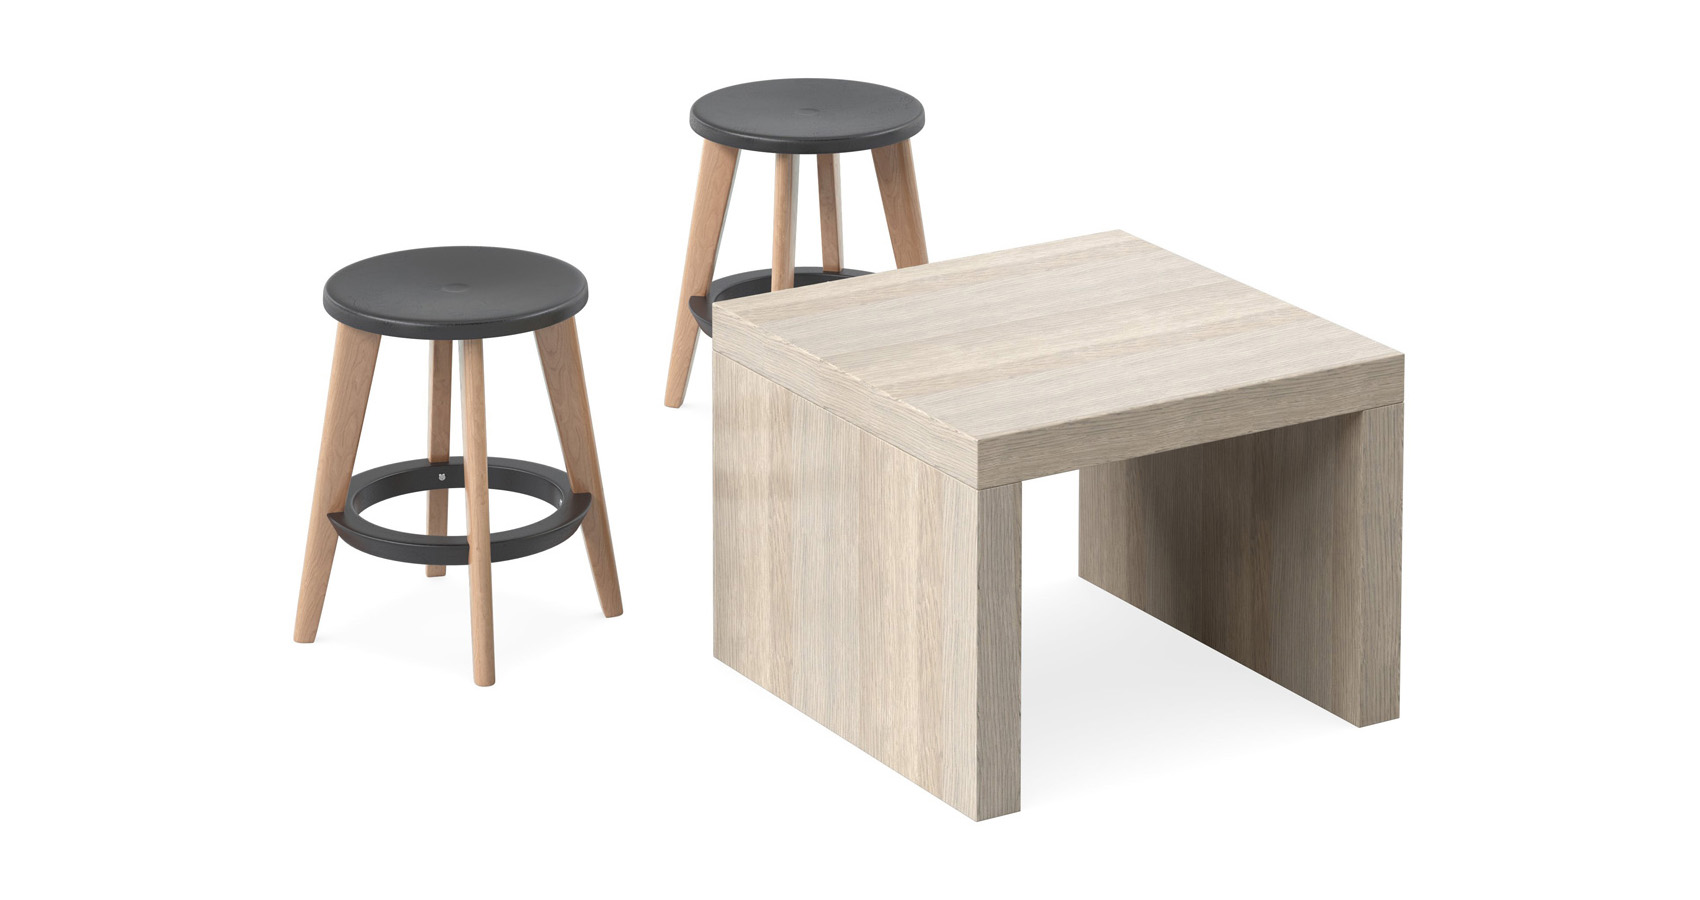 Jive Coffee Table with Pac stools